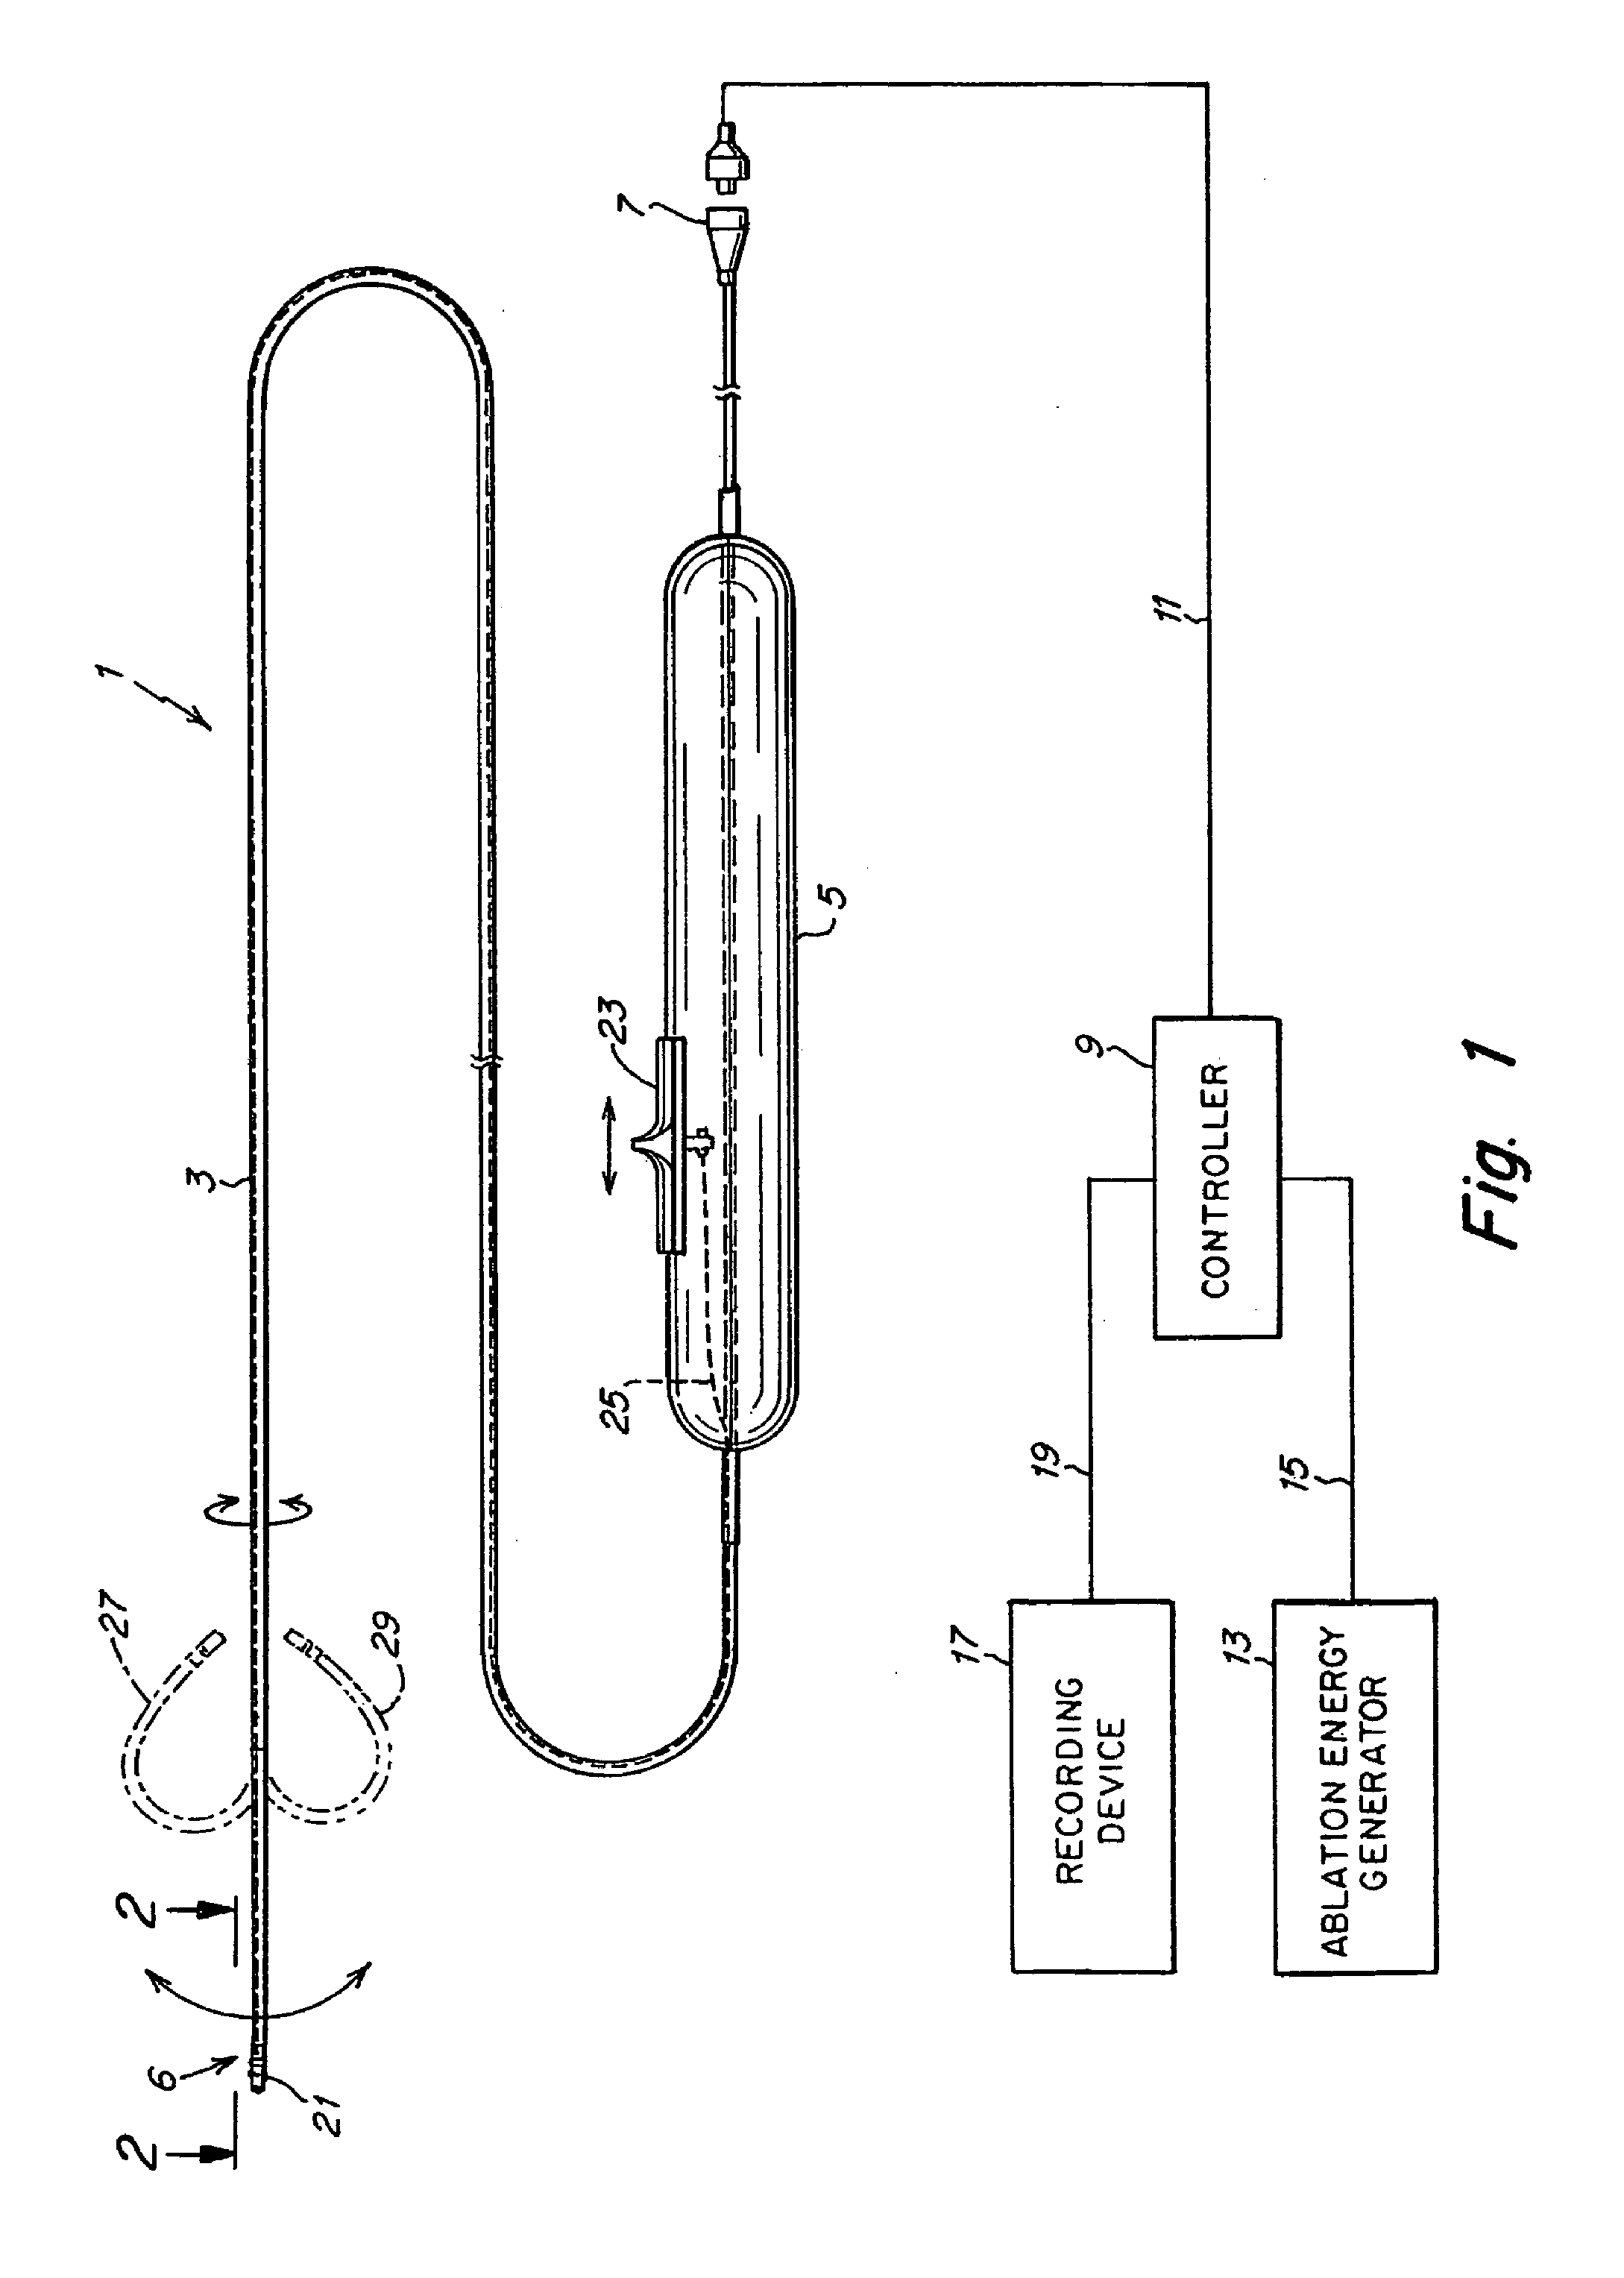 Microelectrode catheter for mapping and ablation